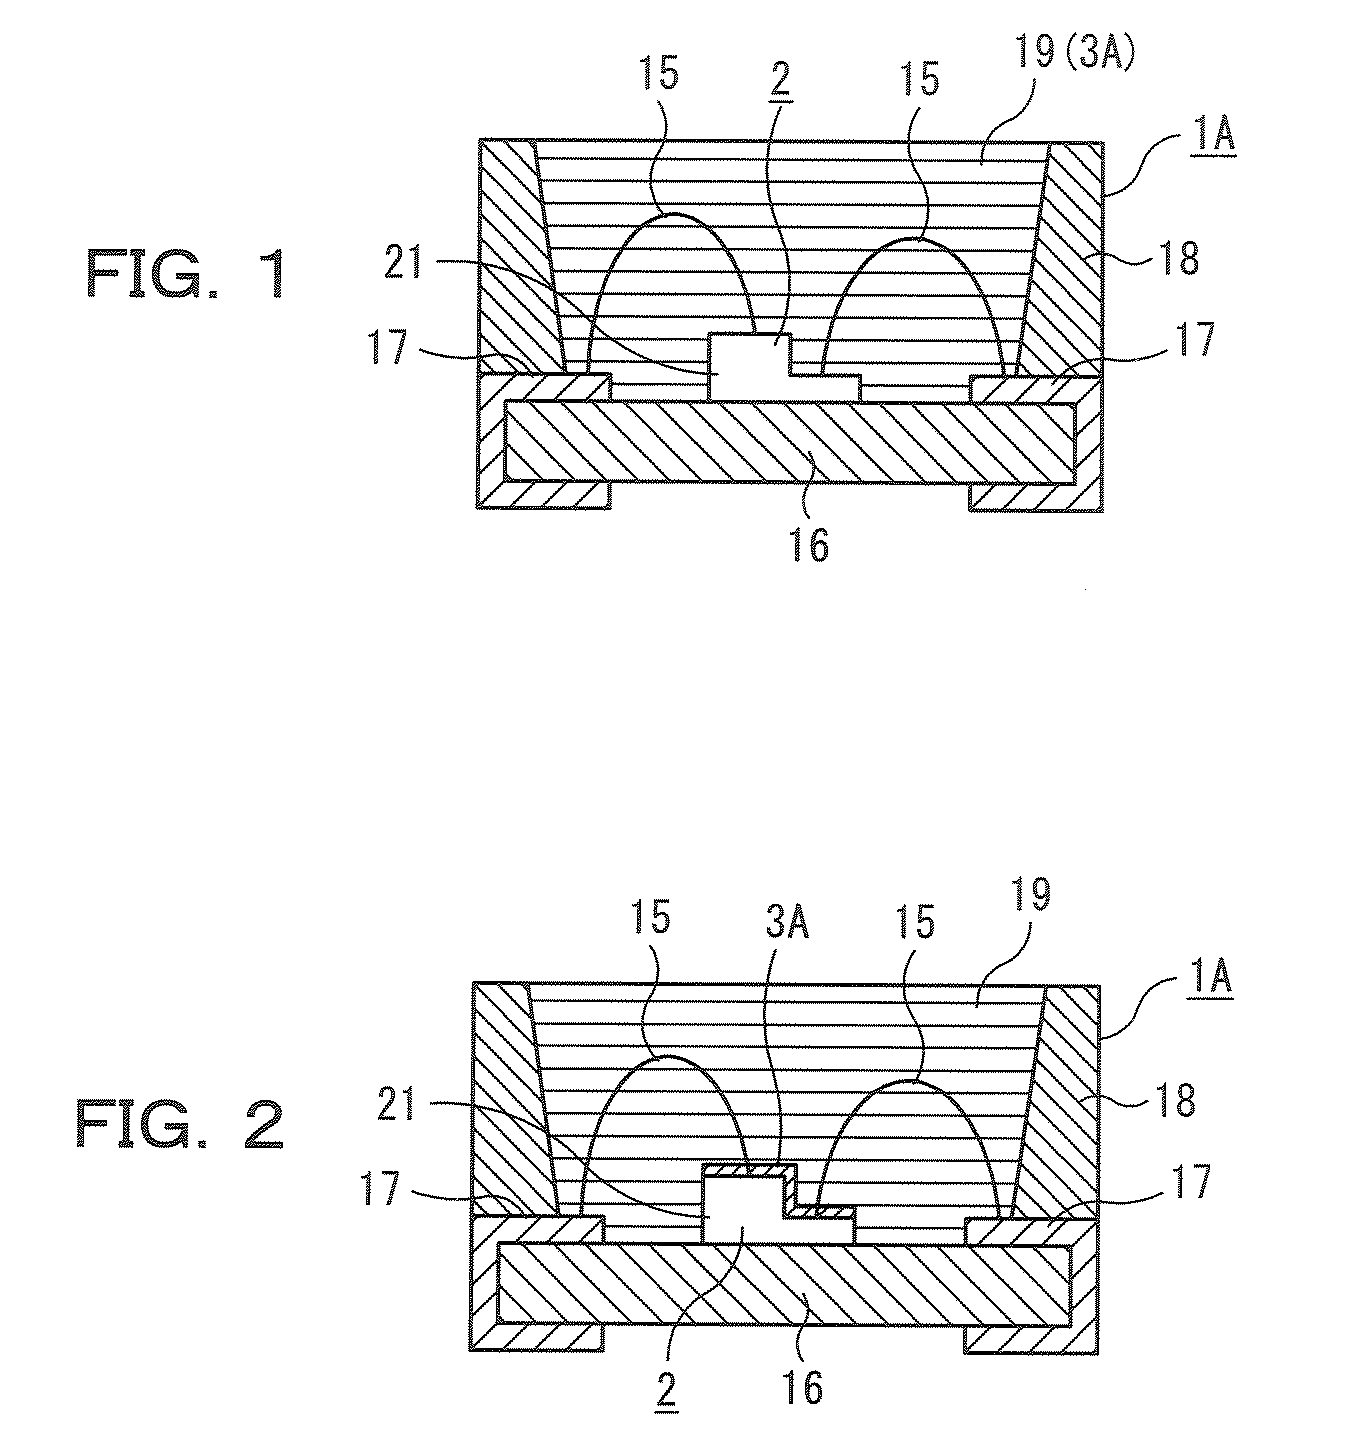 Semiconductor Light Emitting Device Member, Method for Manufacturing Such Semiconductor Light Emitting Device Member and Semiconductor Light Emitting Device Using Such Semiconductor Light Emitting Device Member